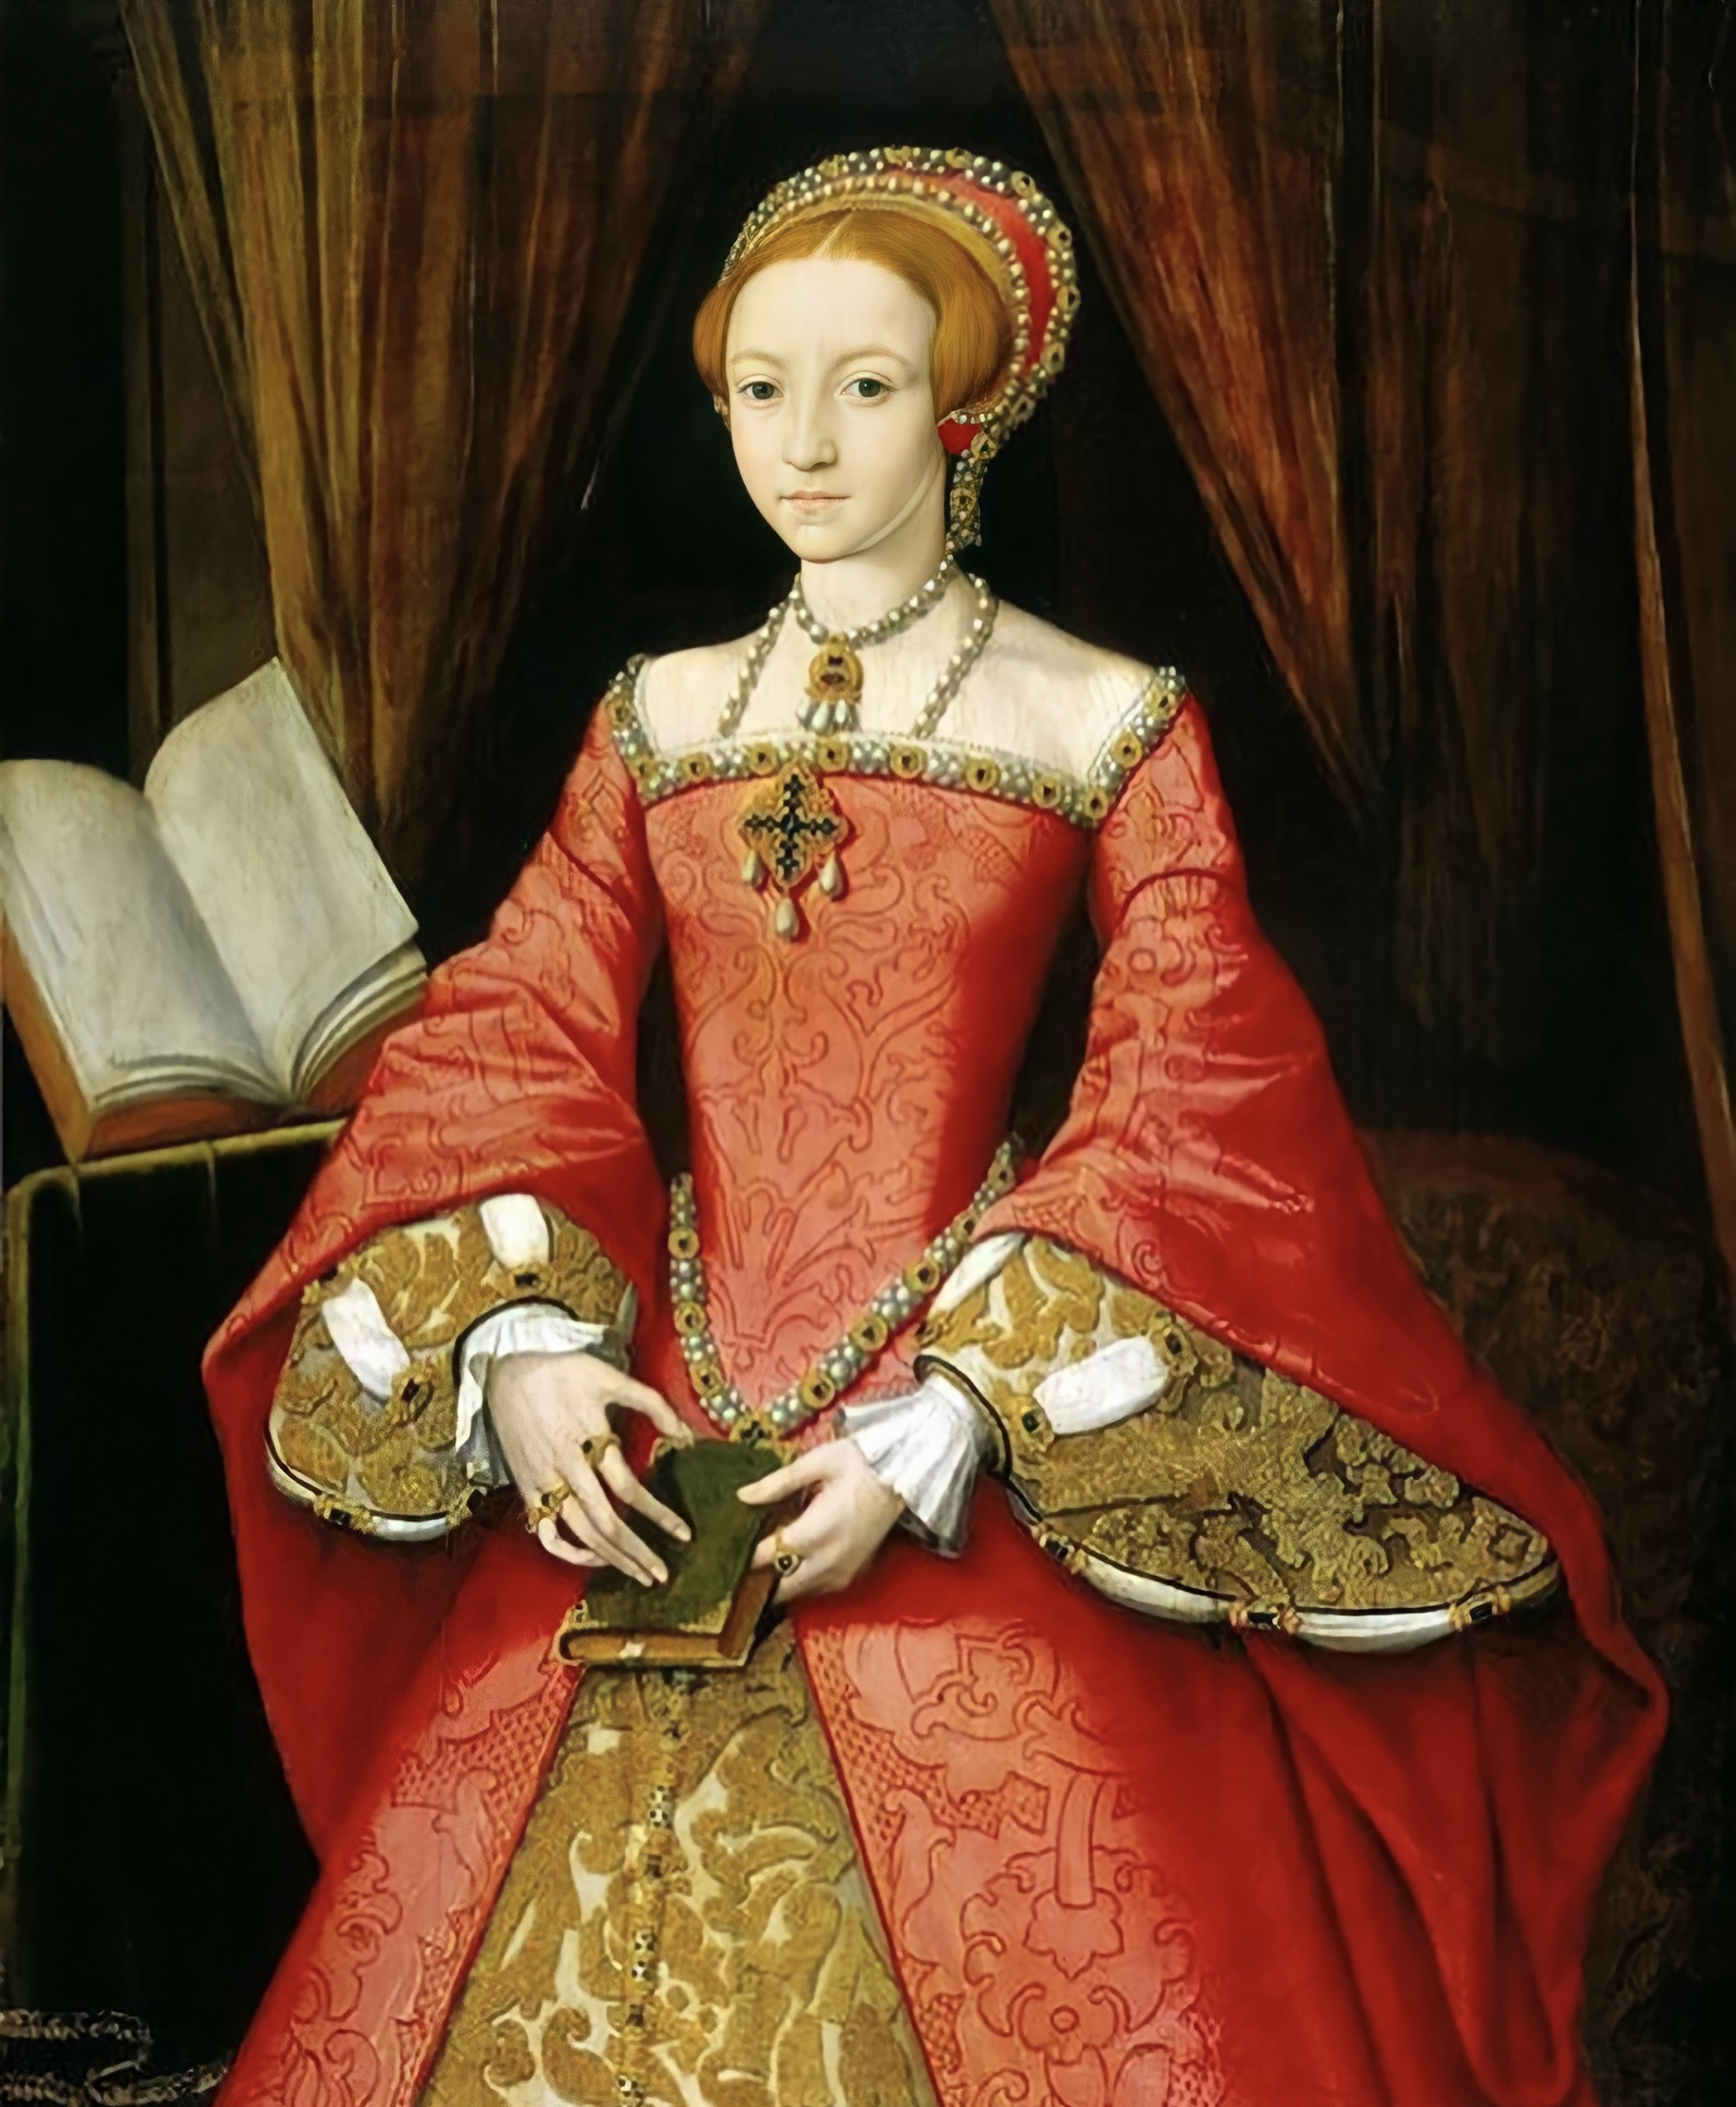 A rare portrait of Elizabeth before her ascension, attributed to William Scrots, 1546